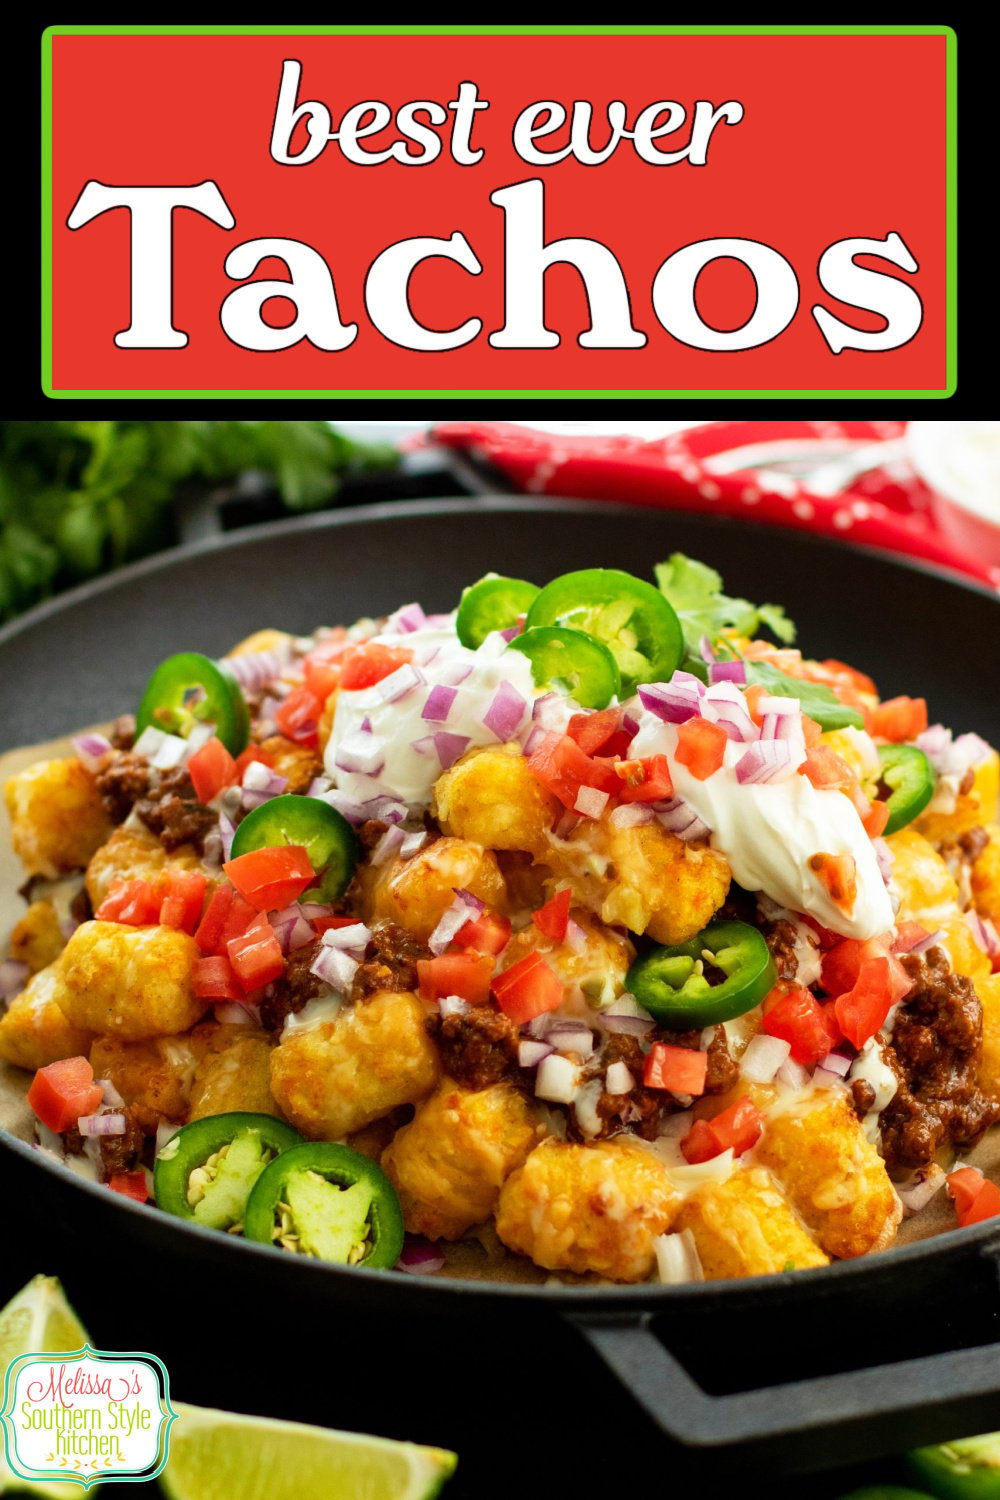 These loaded cheesy Tachos feature crispy baked tater tots loaded with the best nacho toppings #tachos #tatertots #appetizerrecipes #easytotchos #potatorecipes #tatertotrecipes #easygroundbeefrecipes via @melissasssk